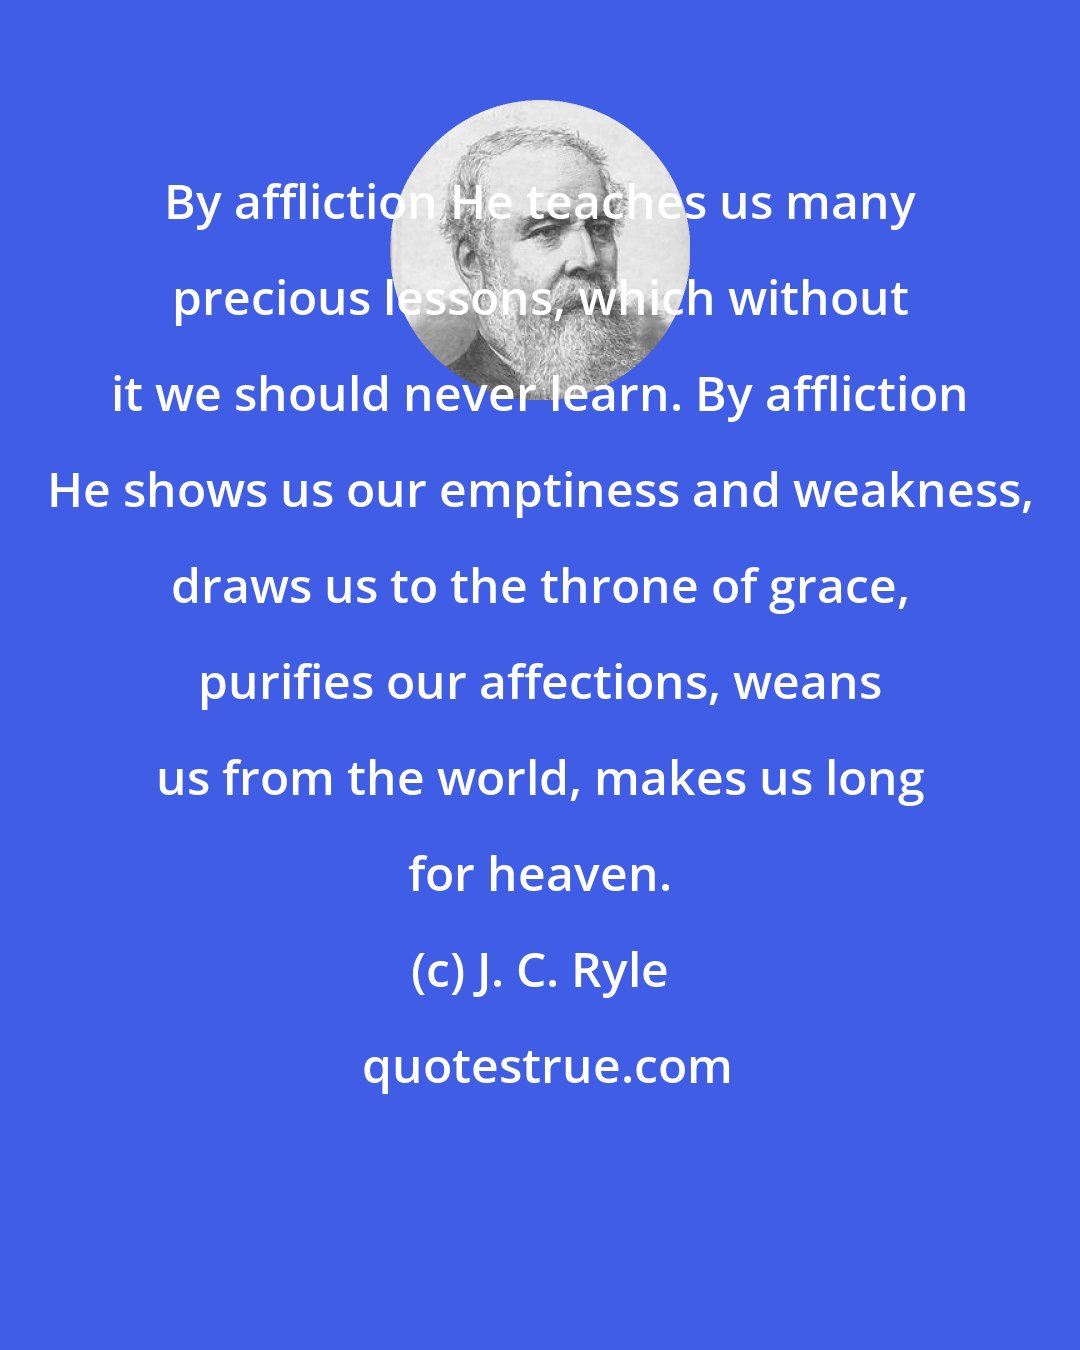 J. C. Ryle: By affliction He teaches us many precious lessons, which without it we should never learn. By affliction He shows us our emptiness and weakness, draws us to the throne of grace, purifies our affections, weans us from the world, makes us long for heaven.